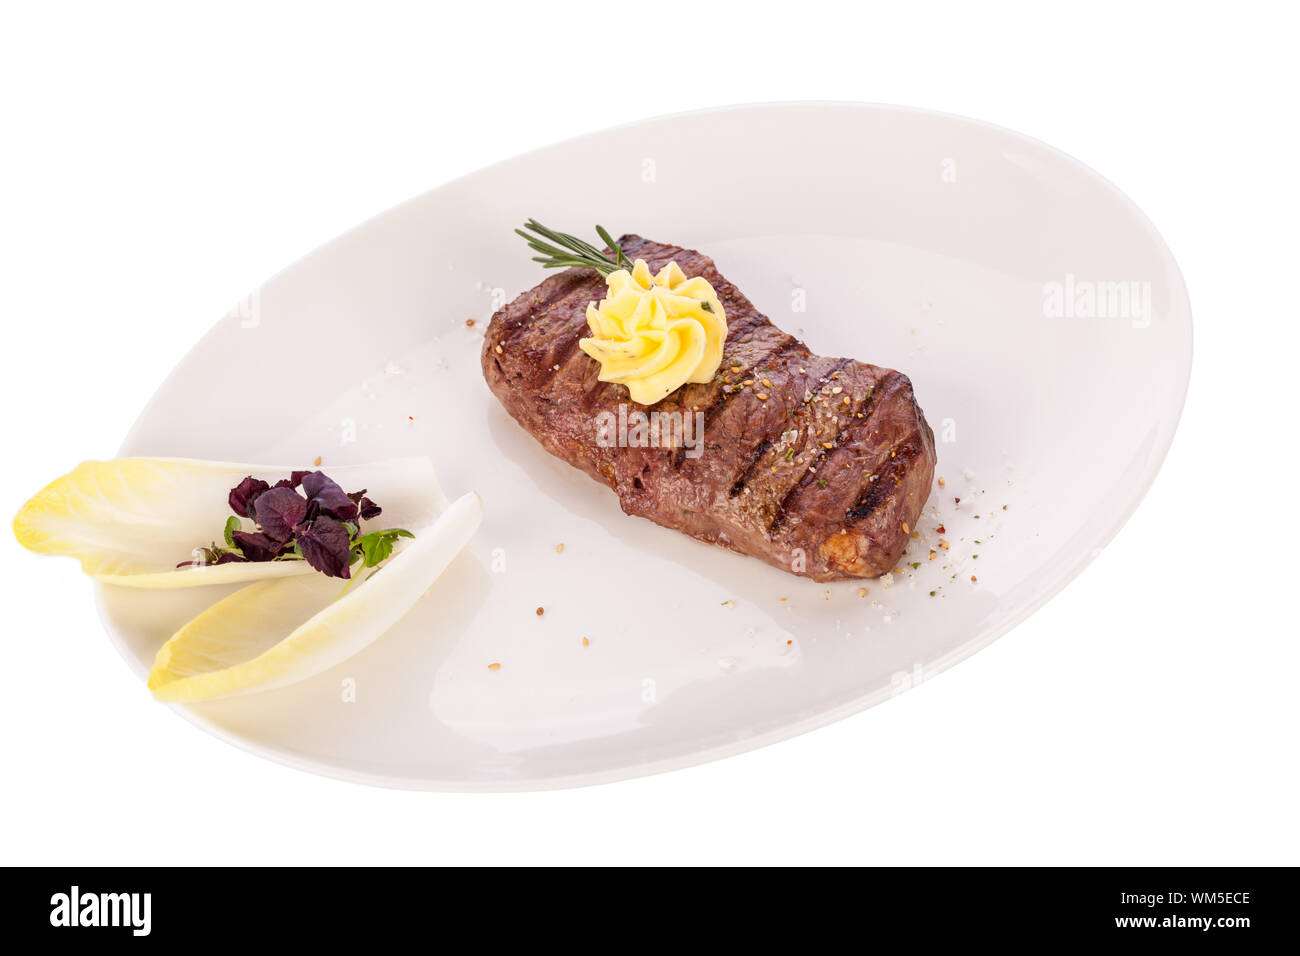 Grilled beef steak topped with butter and rosemary Stock Photo